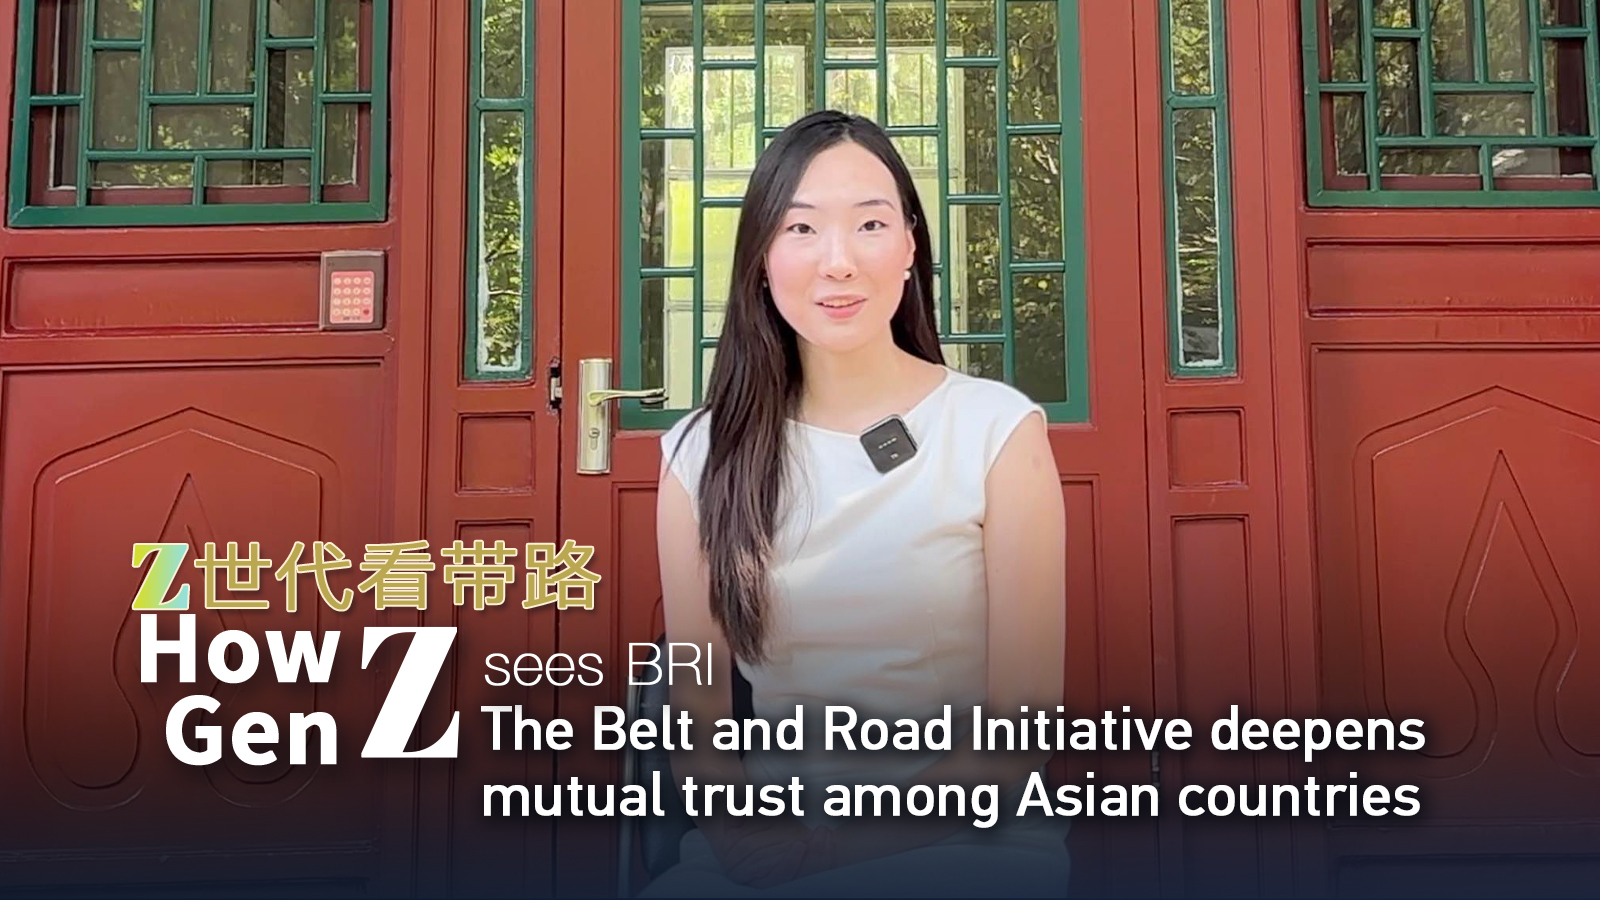 The Belt and Road Initiative deepens trust among Asian countries 